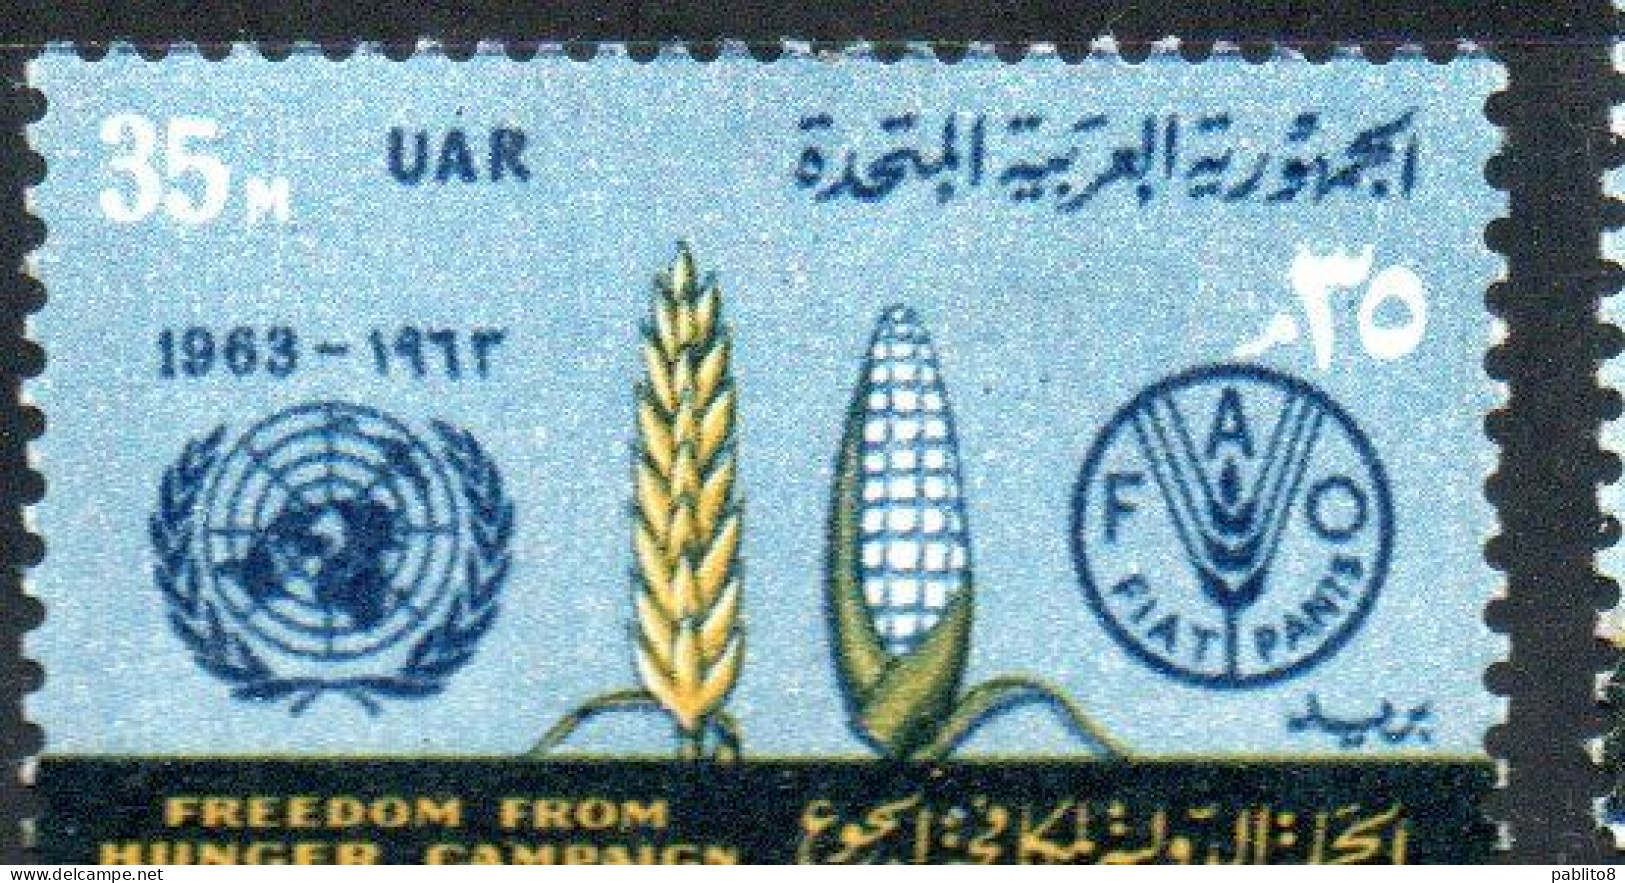 UAR EGYPT EGITTO 1963 FAO FREEDOM FROM HUNGER CAMPAIGN WHEAT CORN AND EMBLEMS 35m MH - Neufs